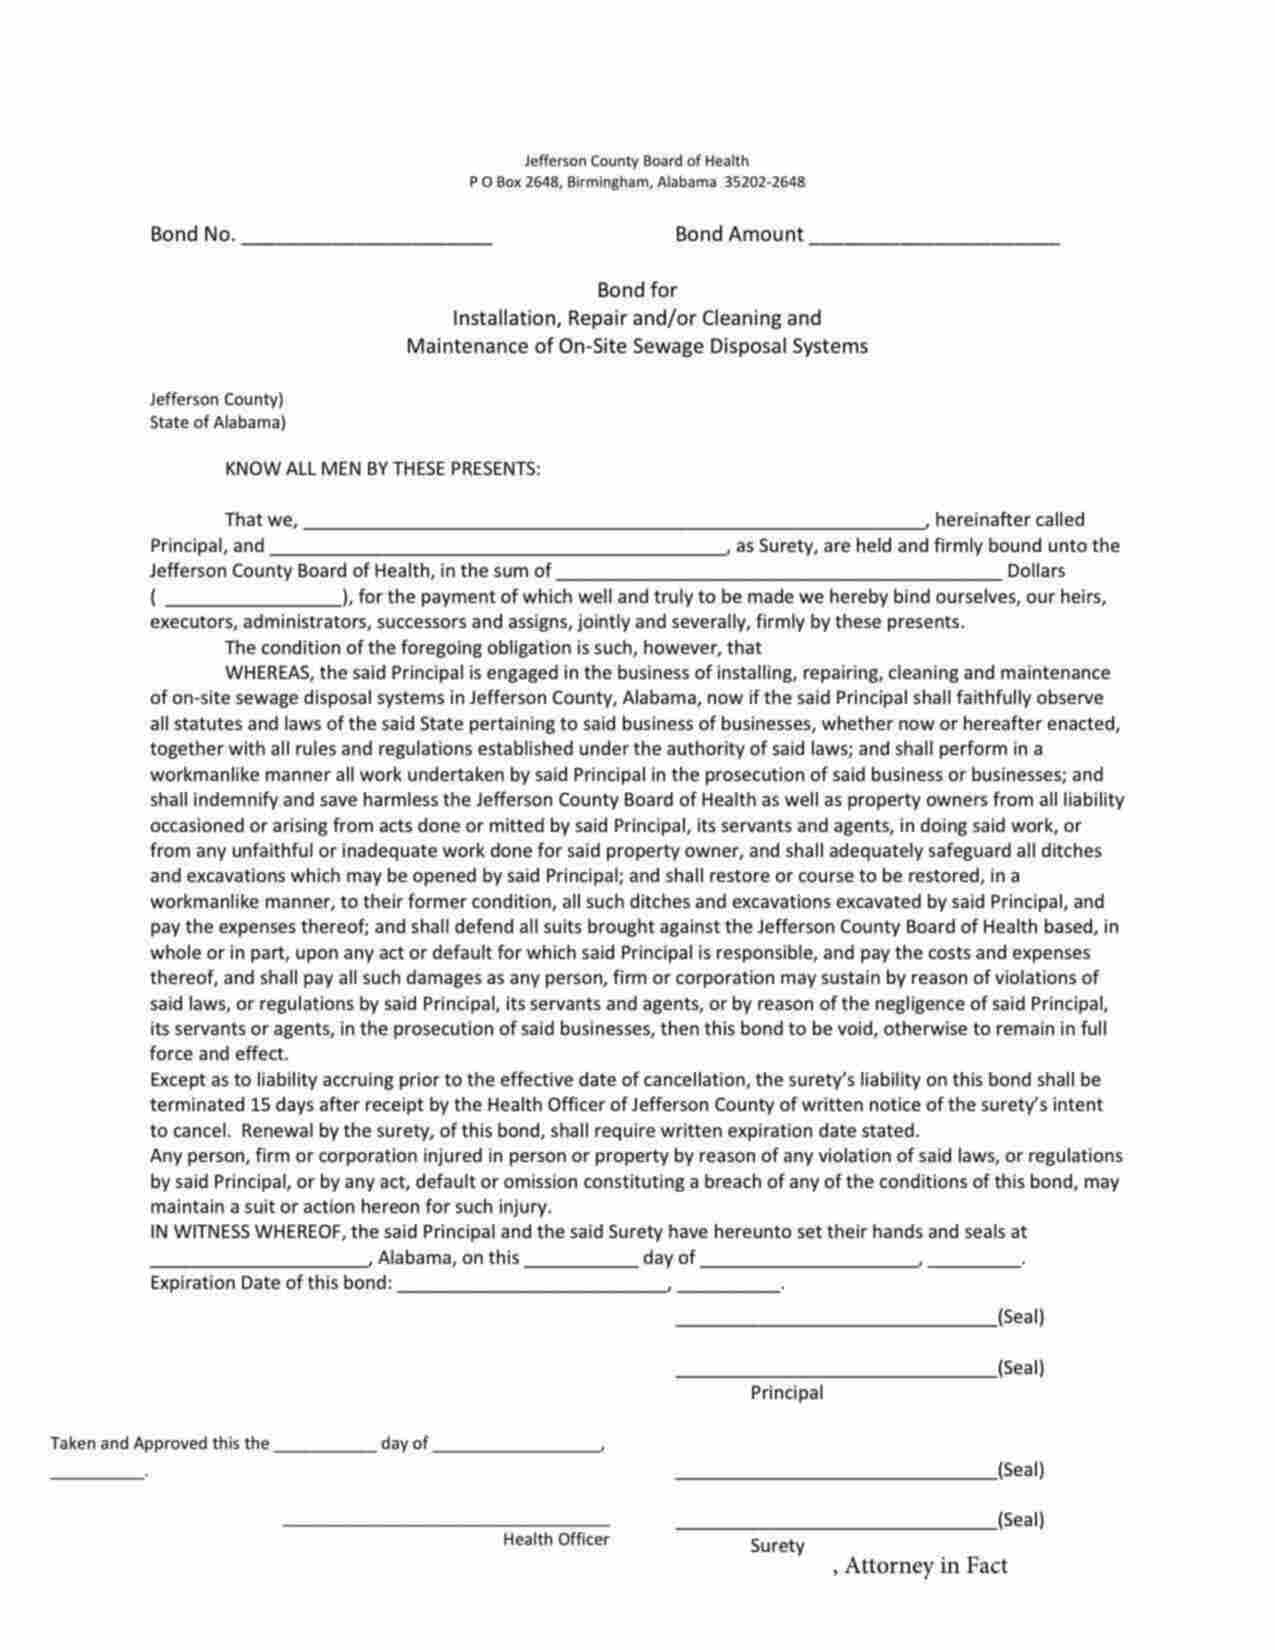 Alabama Installation, Repair and/or Cleaning and Maintenance of On-Site Sewage Disposal Systems Bond Form